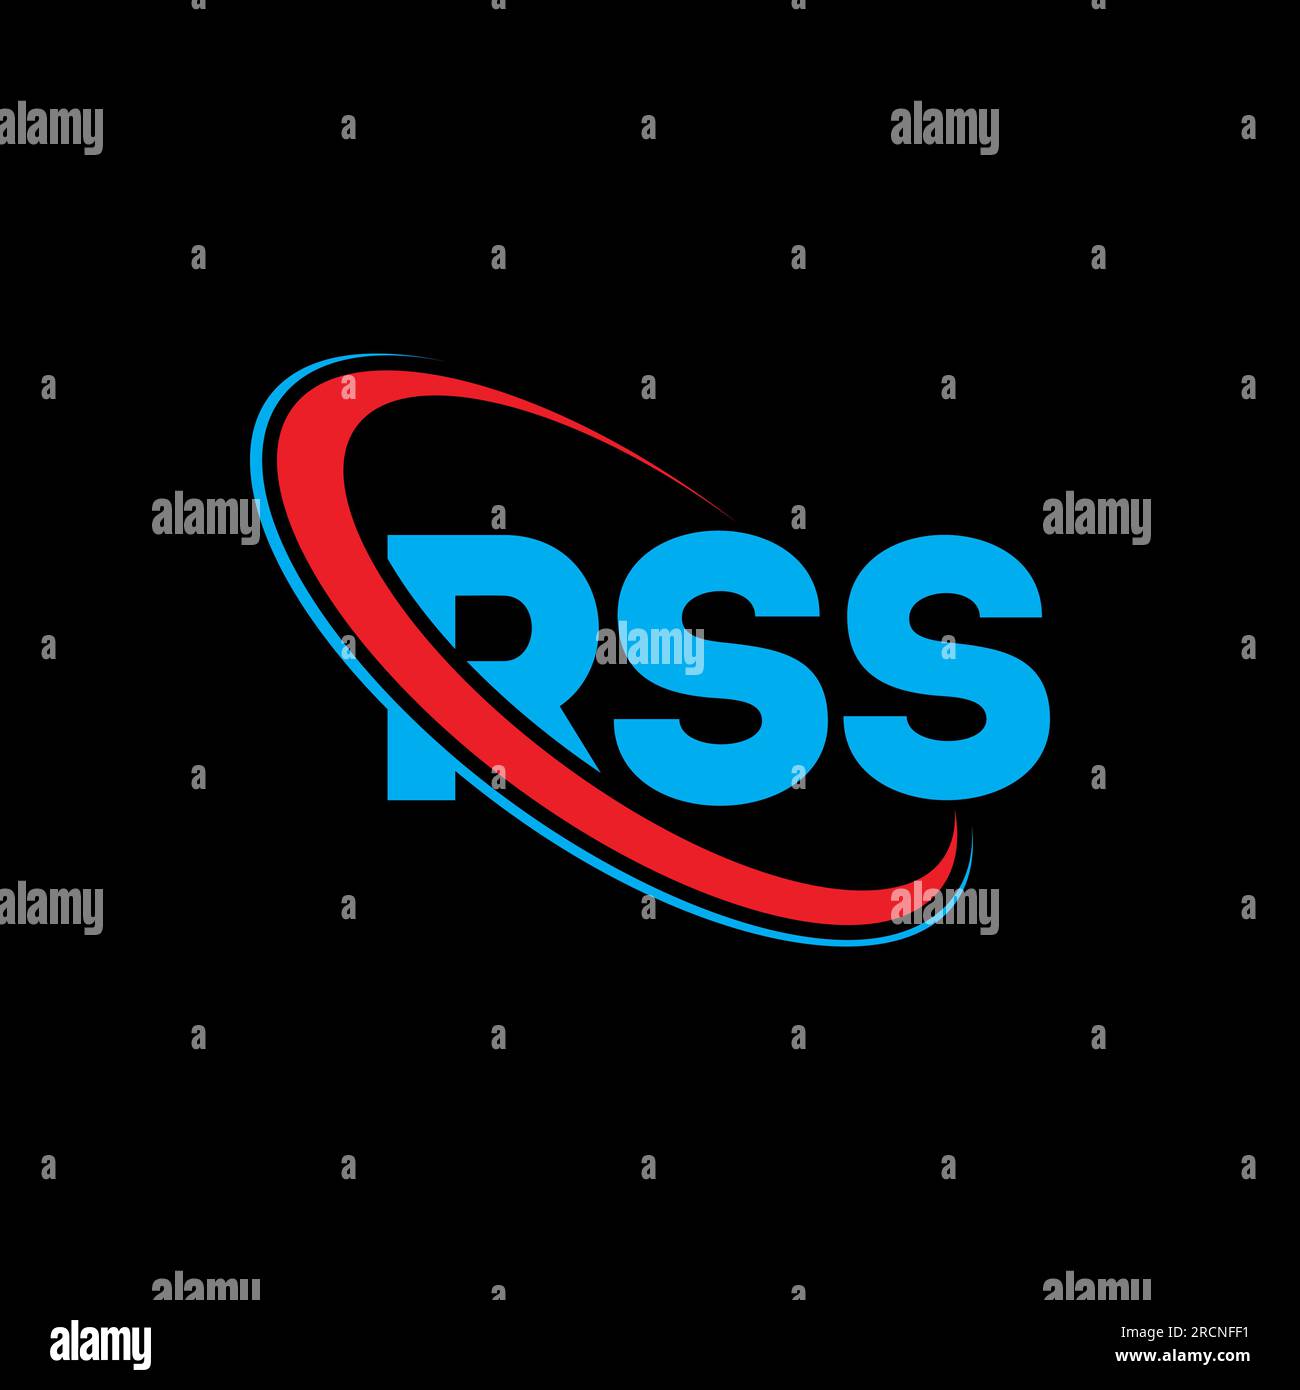 RSS logo. RSS letter. RSS letter logo design. Initials RSS logo linked with circle and uppercase monogram logo. RSS typography for technology, busines Stock Vector